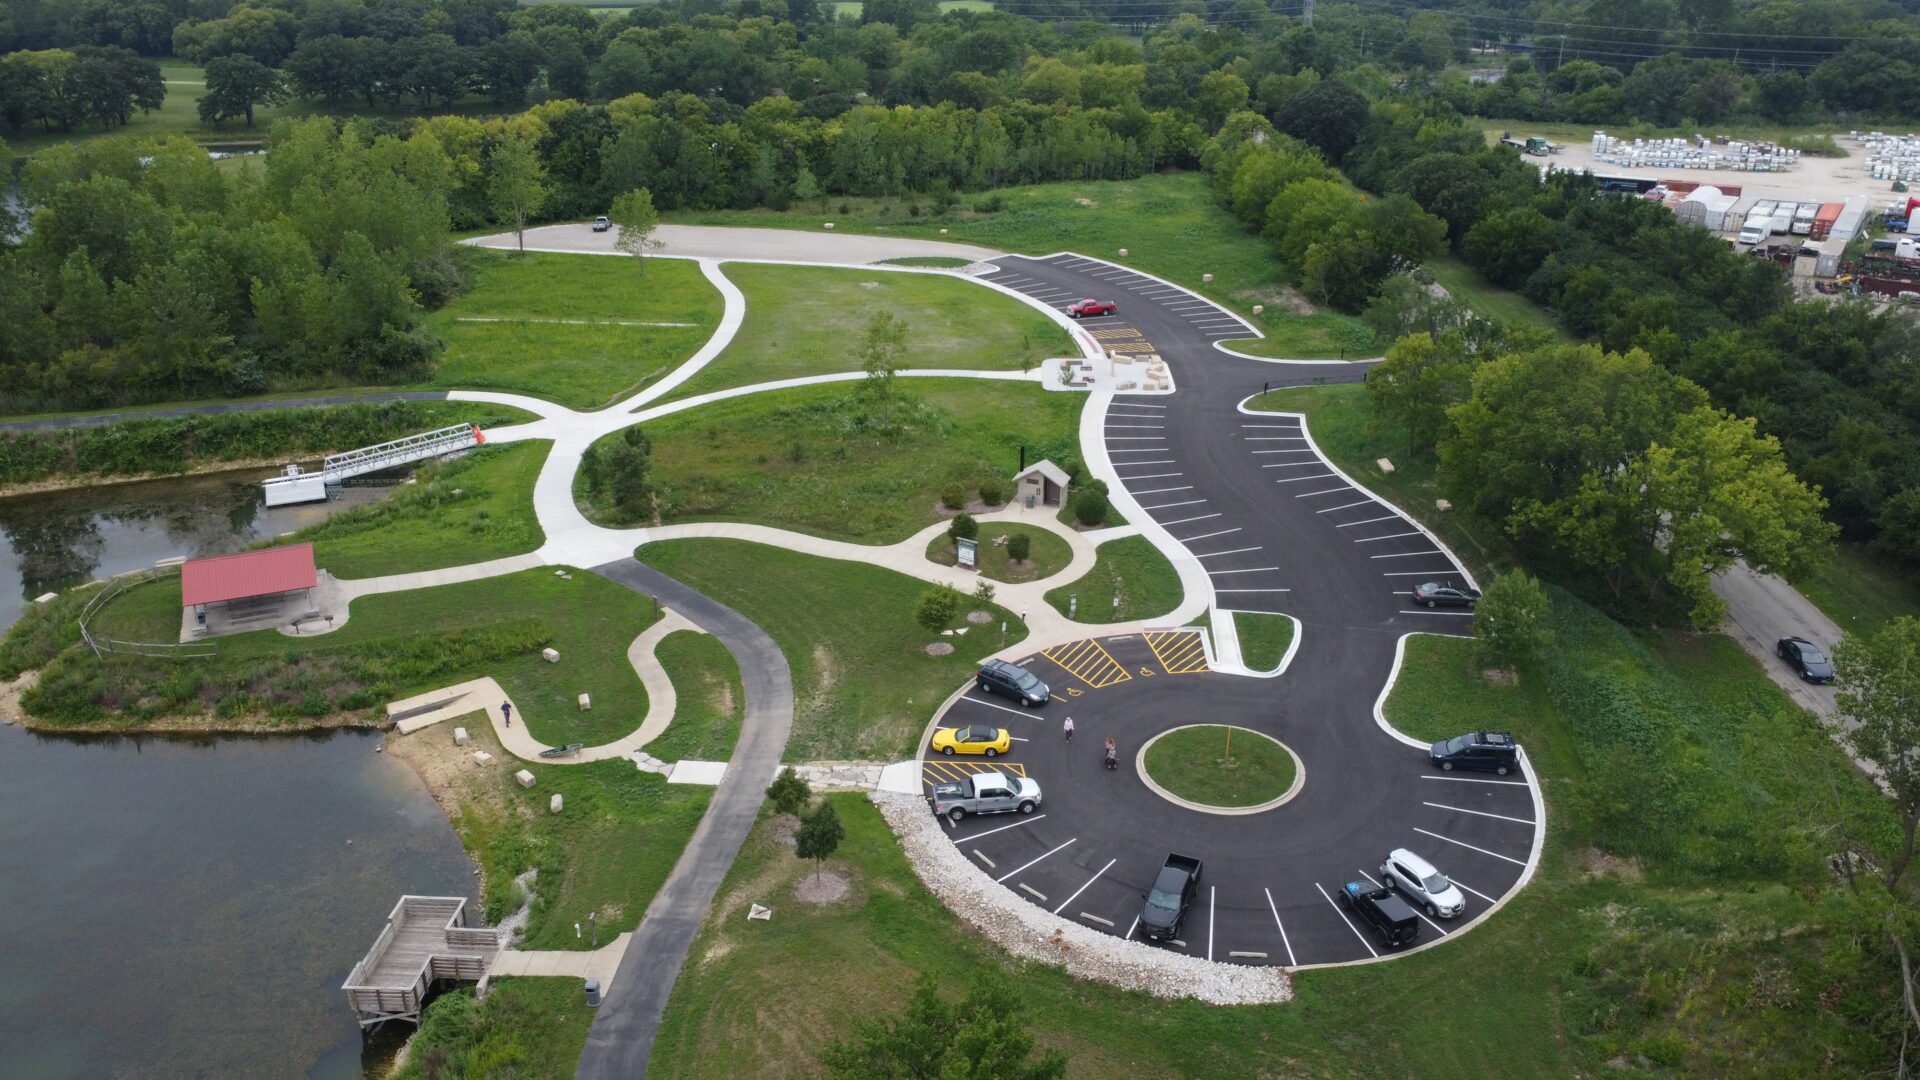 Aerial view of scenic park with winding pathways and lake.